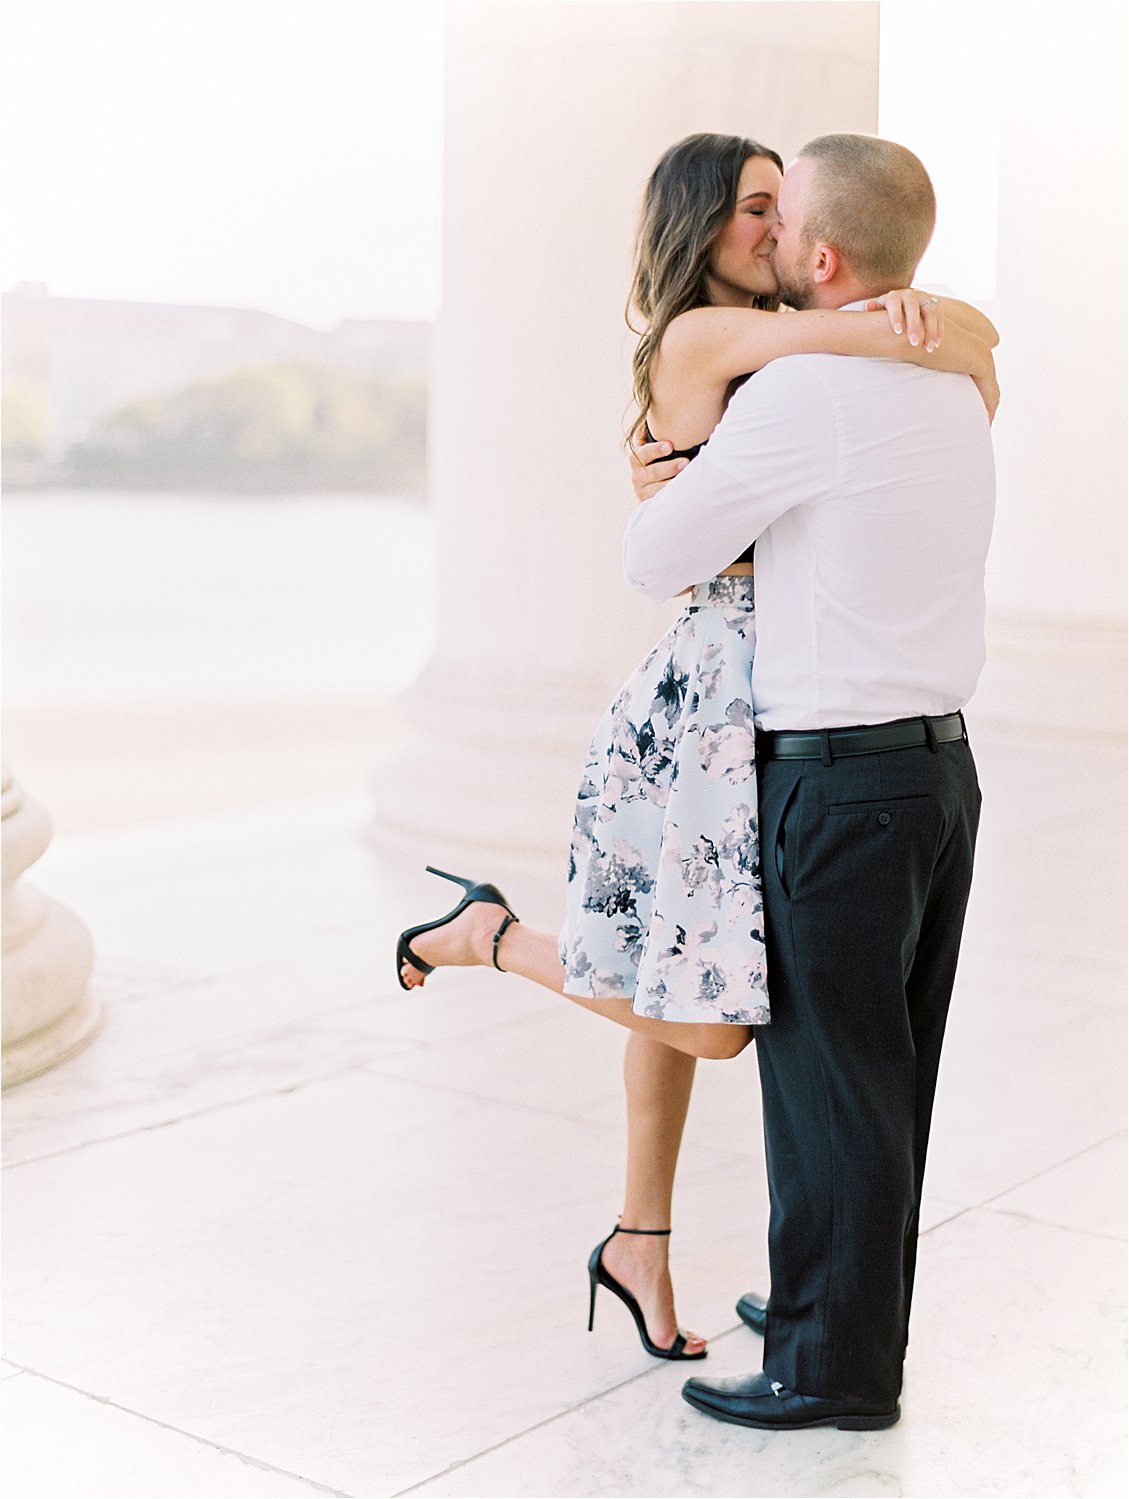 Jefferson Memorial Engagement Session with Washington DC Film Engagement and Wedding Photographer, Renee Hollingshead.